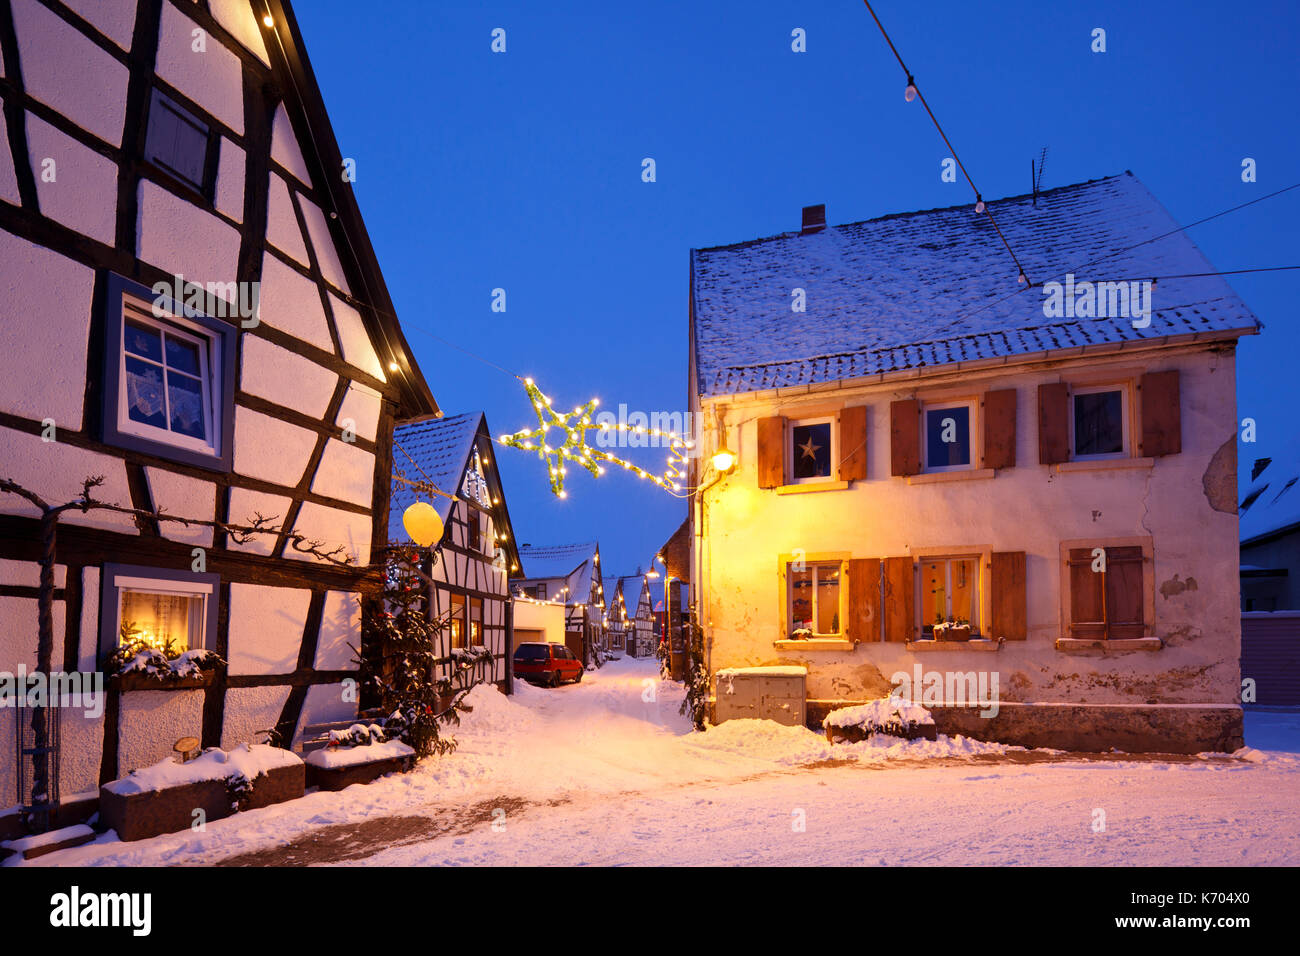 An alley with half-timbered houses and christmas lights at night during snowfall in Lachen, Neustadt an der Weinstrasse, Germany. Stock Photo